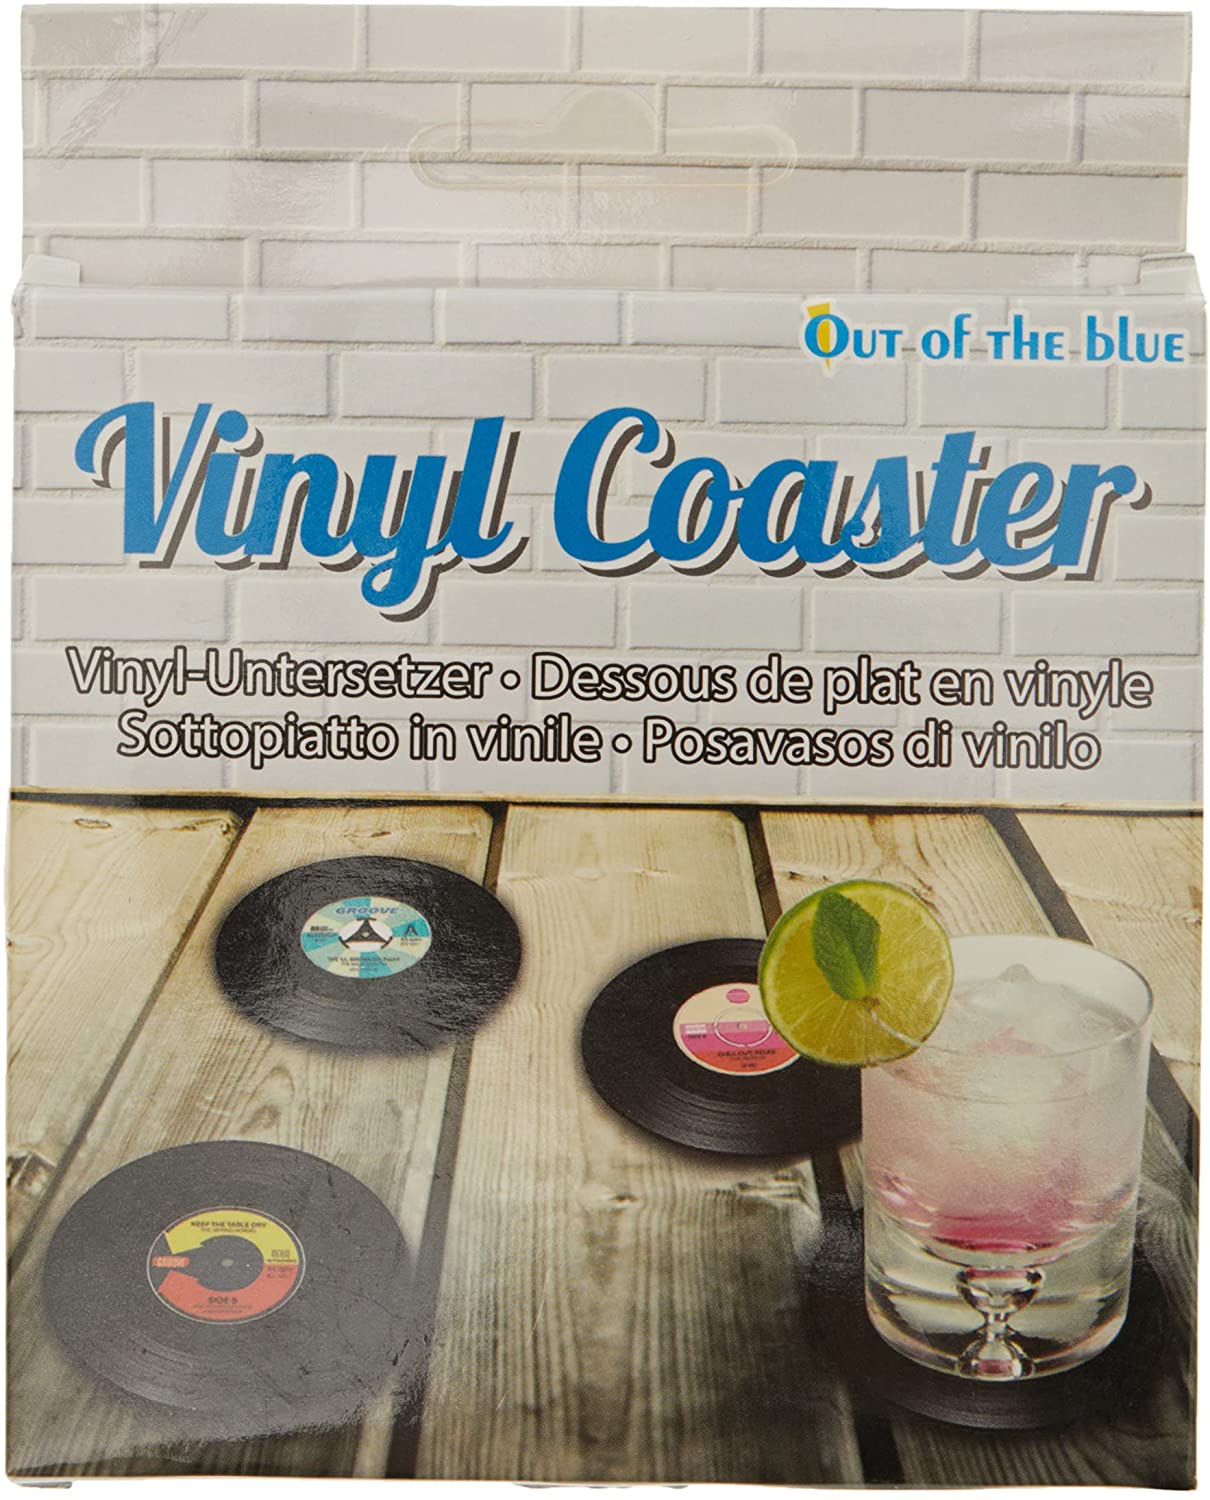 Out of the Blue 71/3075 Coaster in Vinyl Record Design, Offers Protection Against Marks, Stains, Heat and Scratches, Approx. 11 cm, Set of 4 in Gift Box